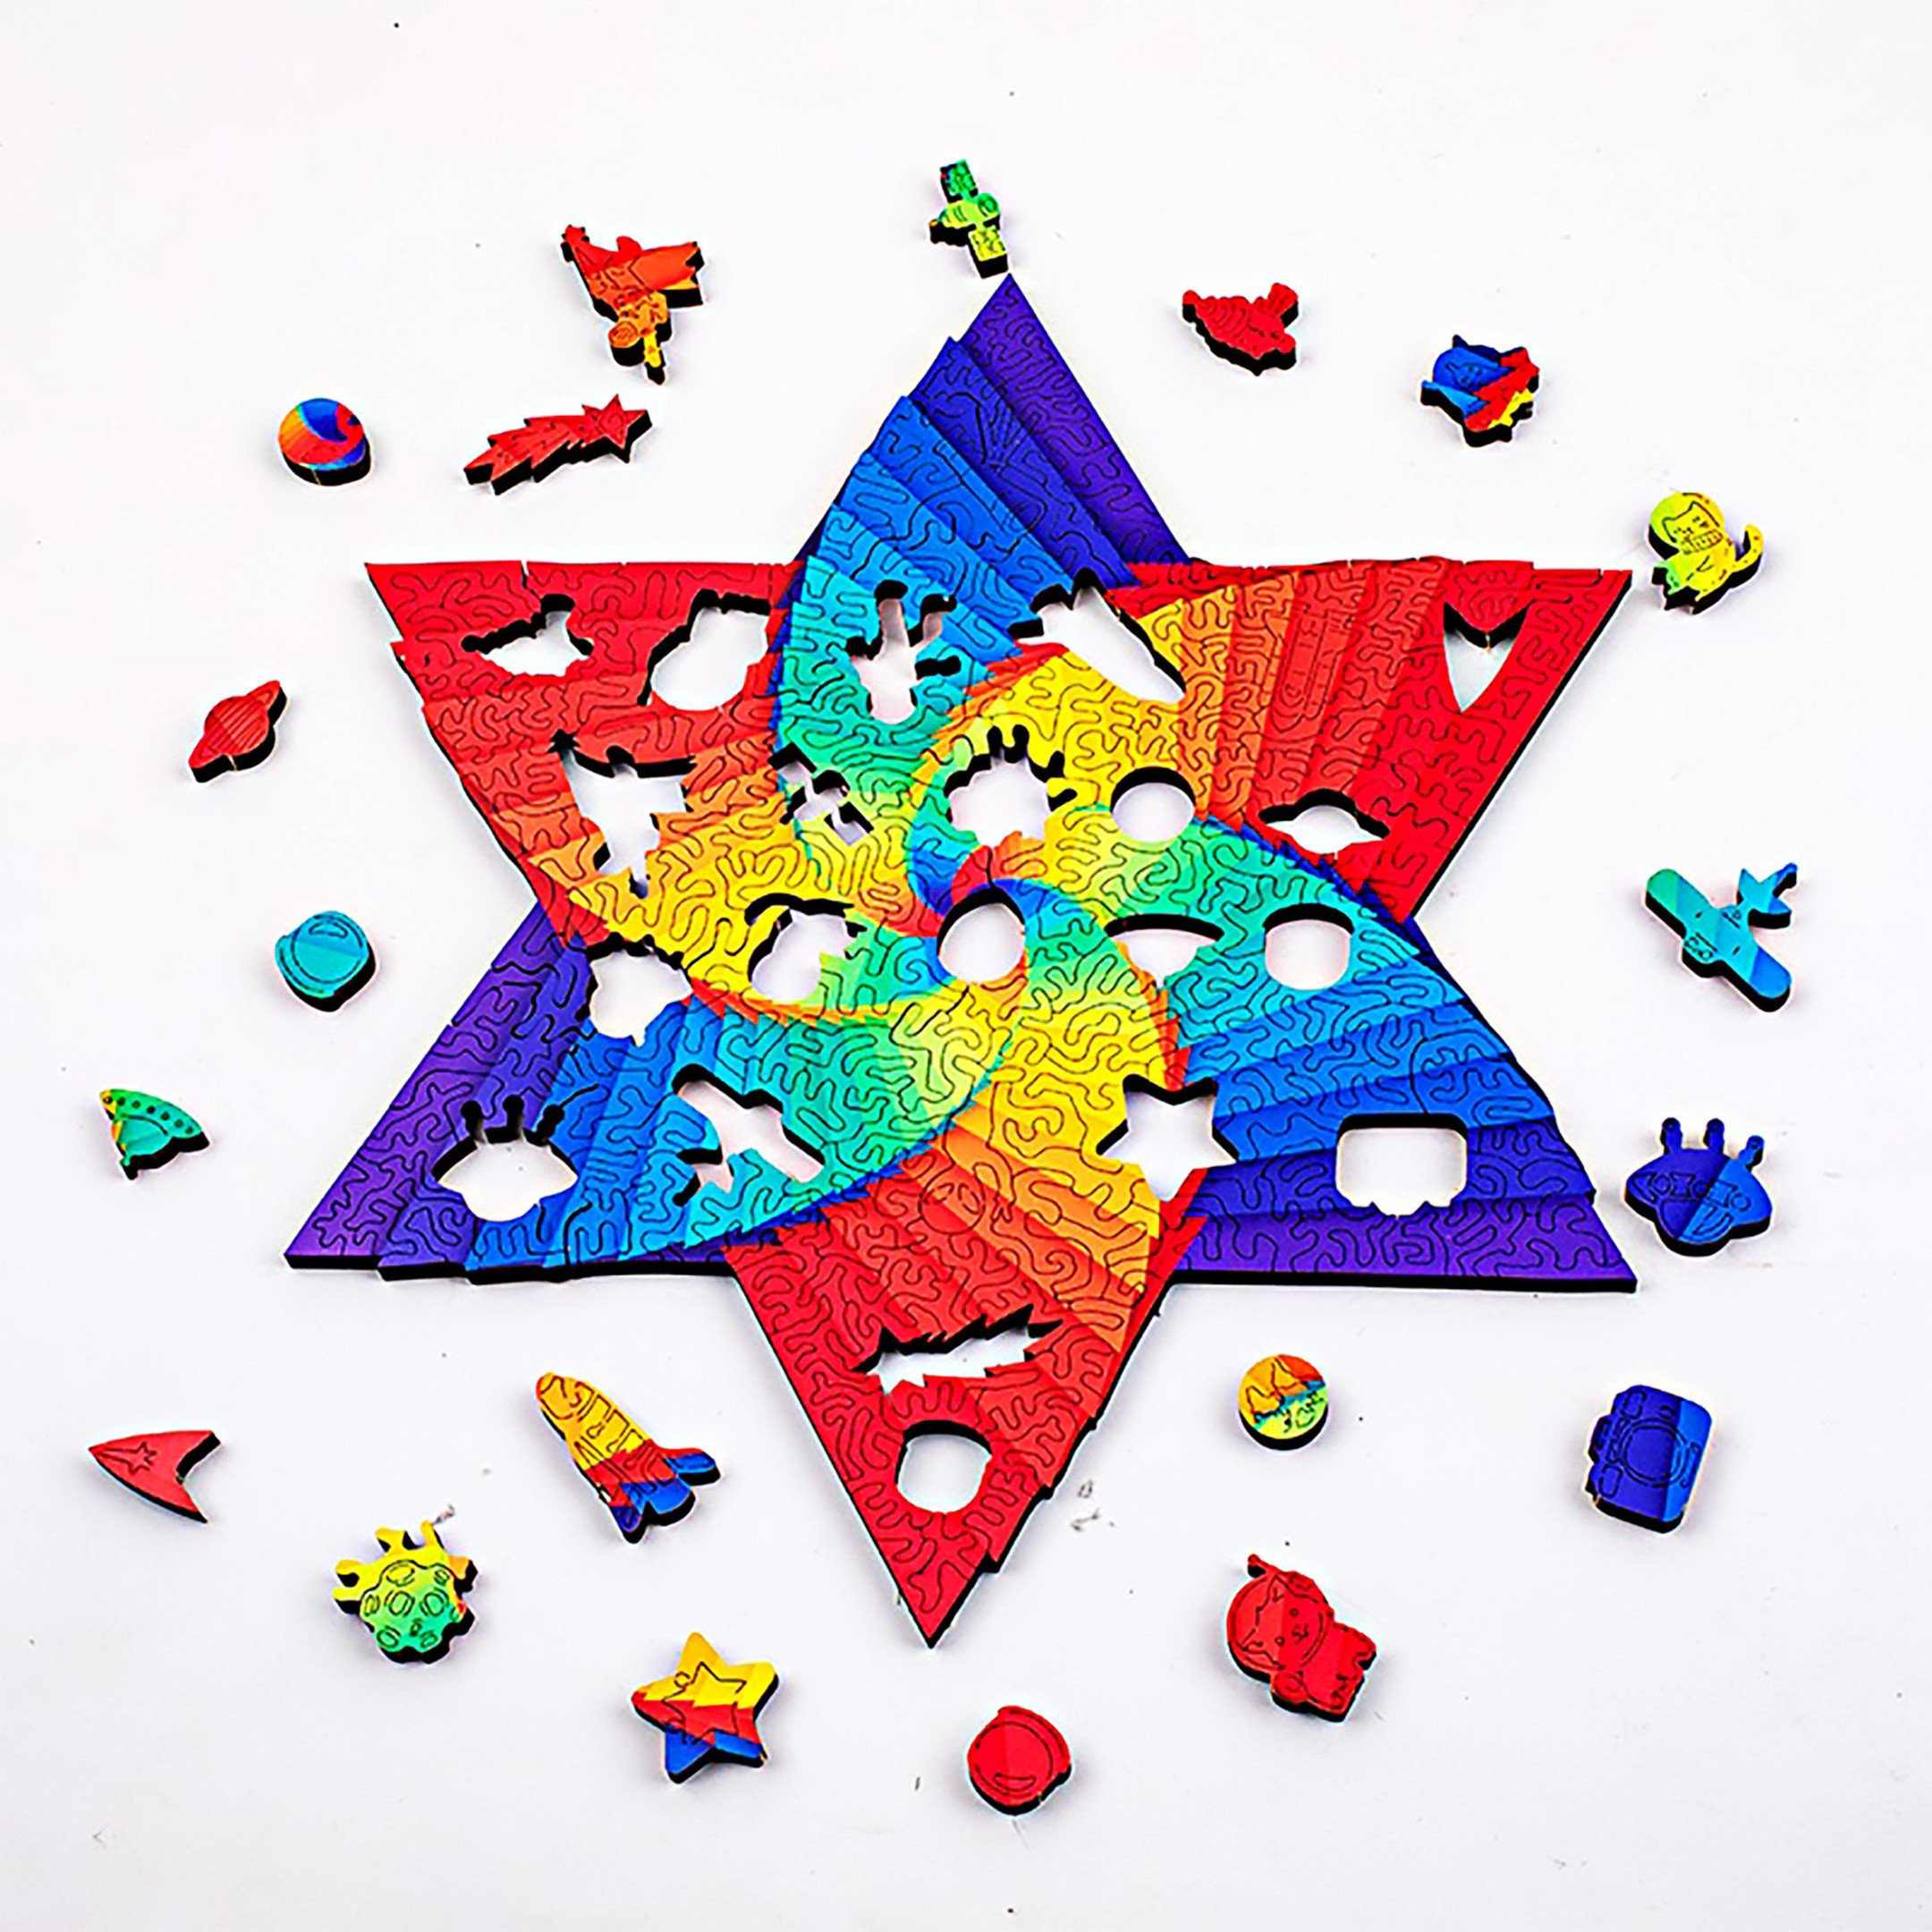 six-pointed star Wooden Color Puzzles - Assemble Puzzles - Logic Puzzles